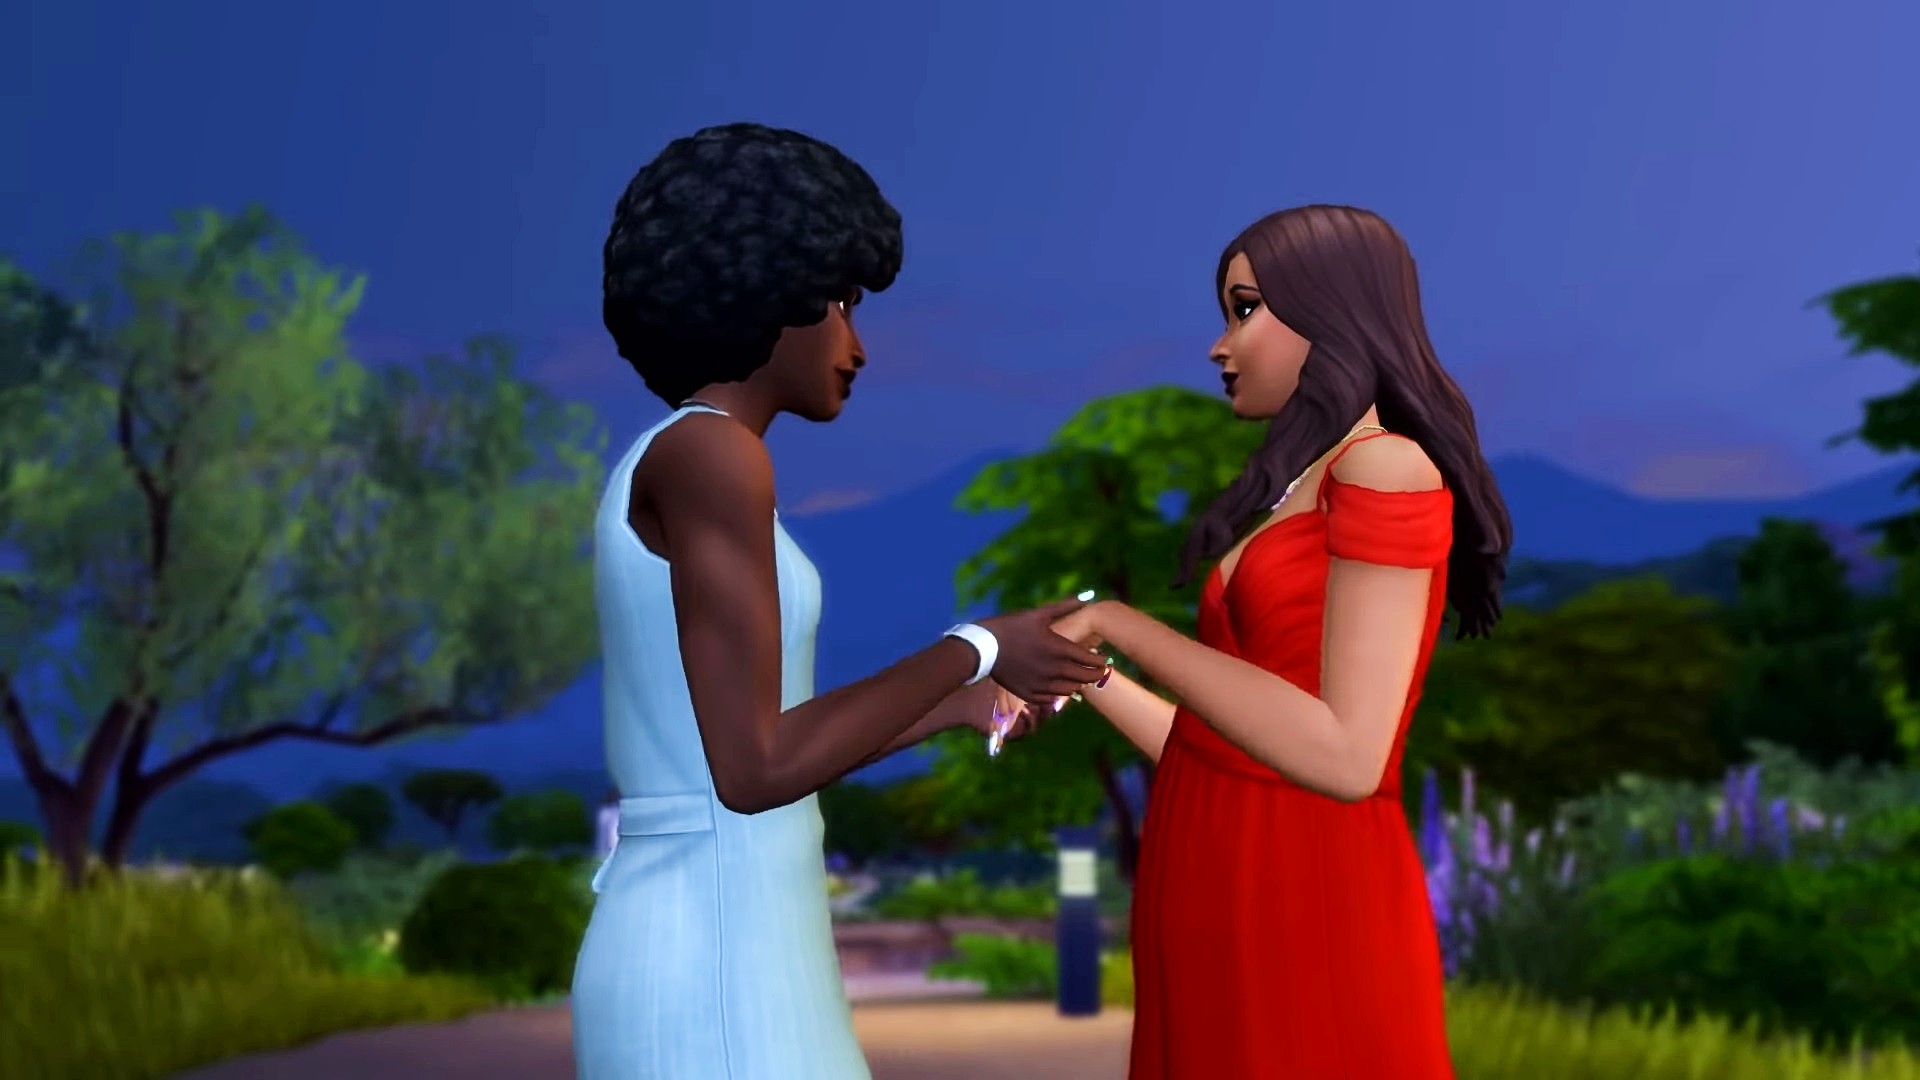 Sims 4 wedding expansion won't release in Russia due to anti-LGBTQ law